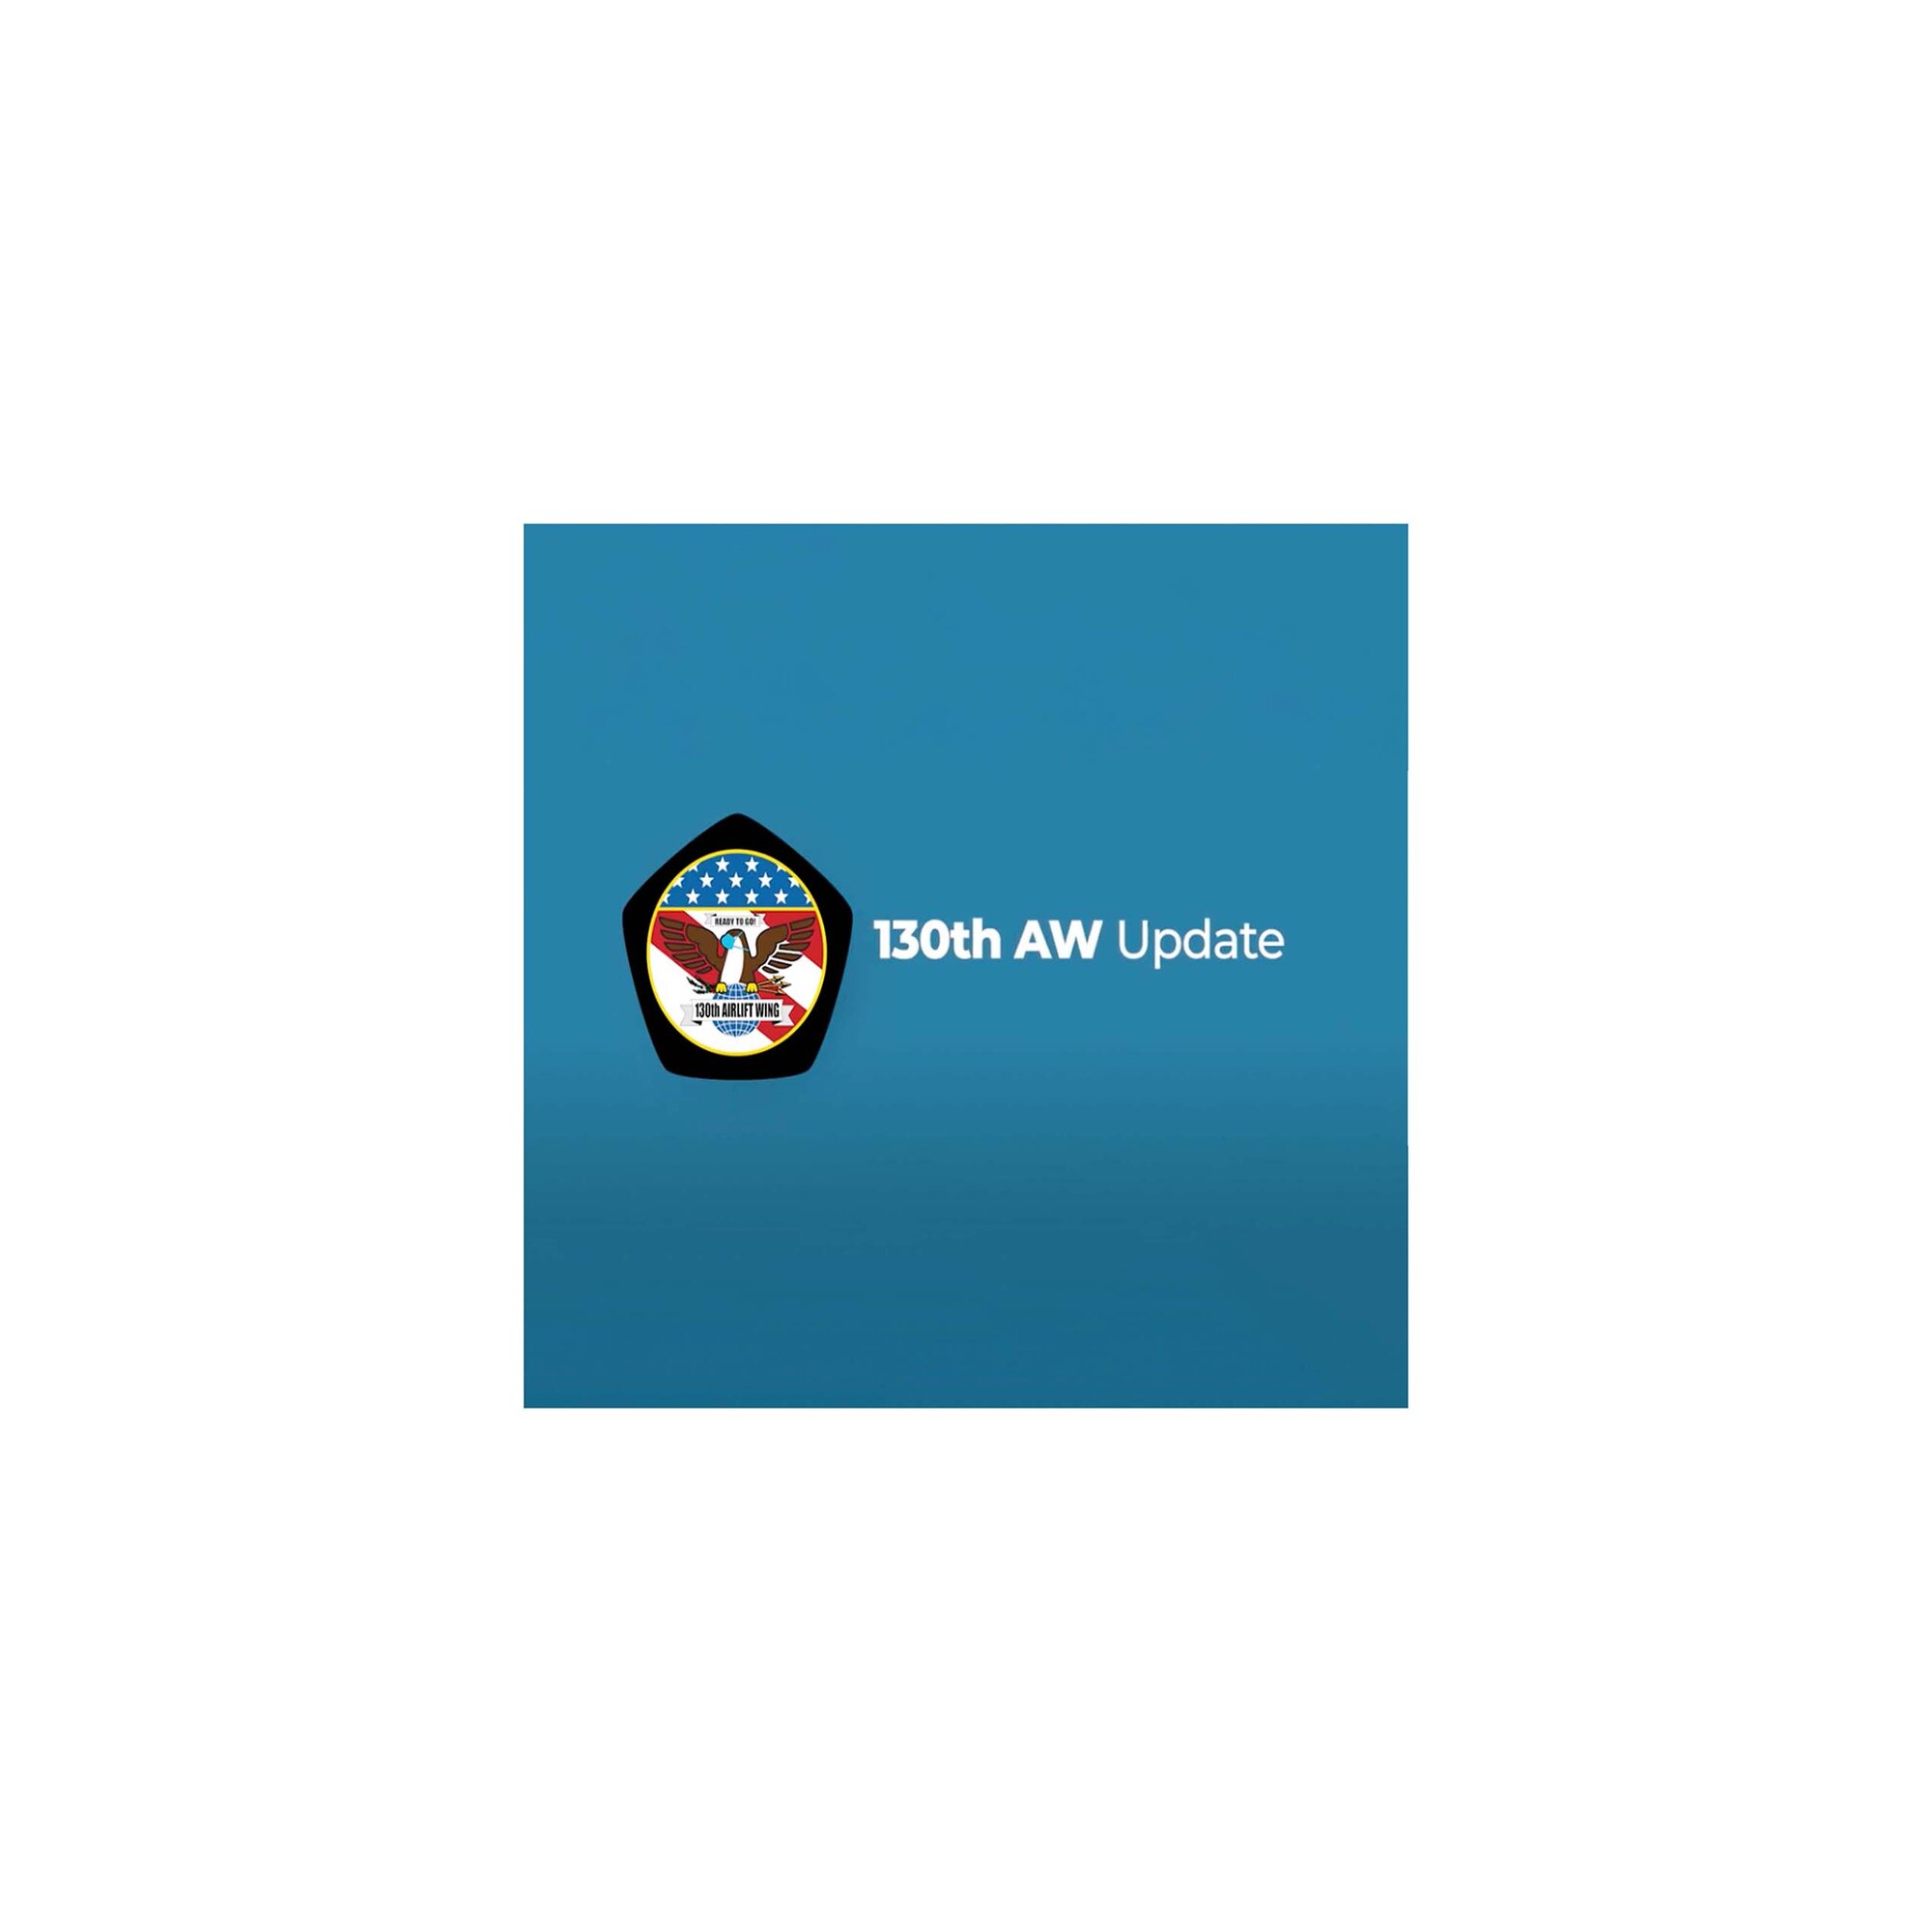 Logo for the 130th AW Update